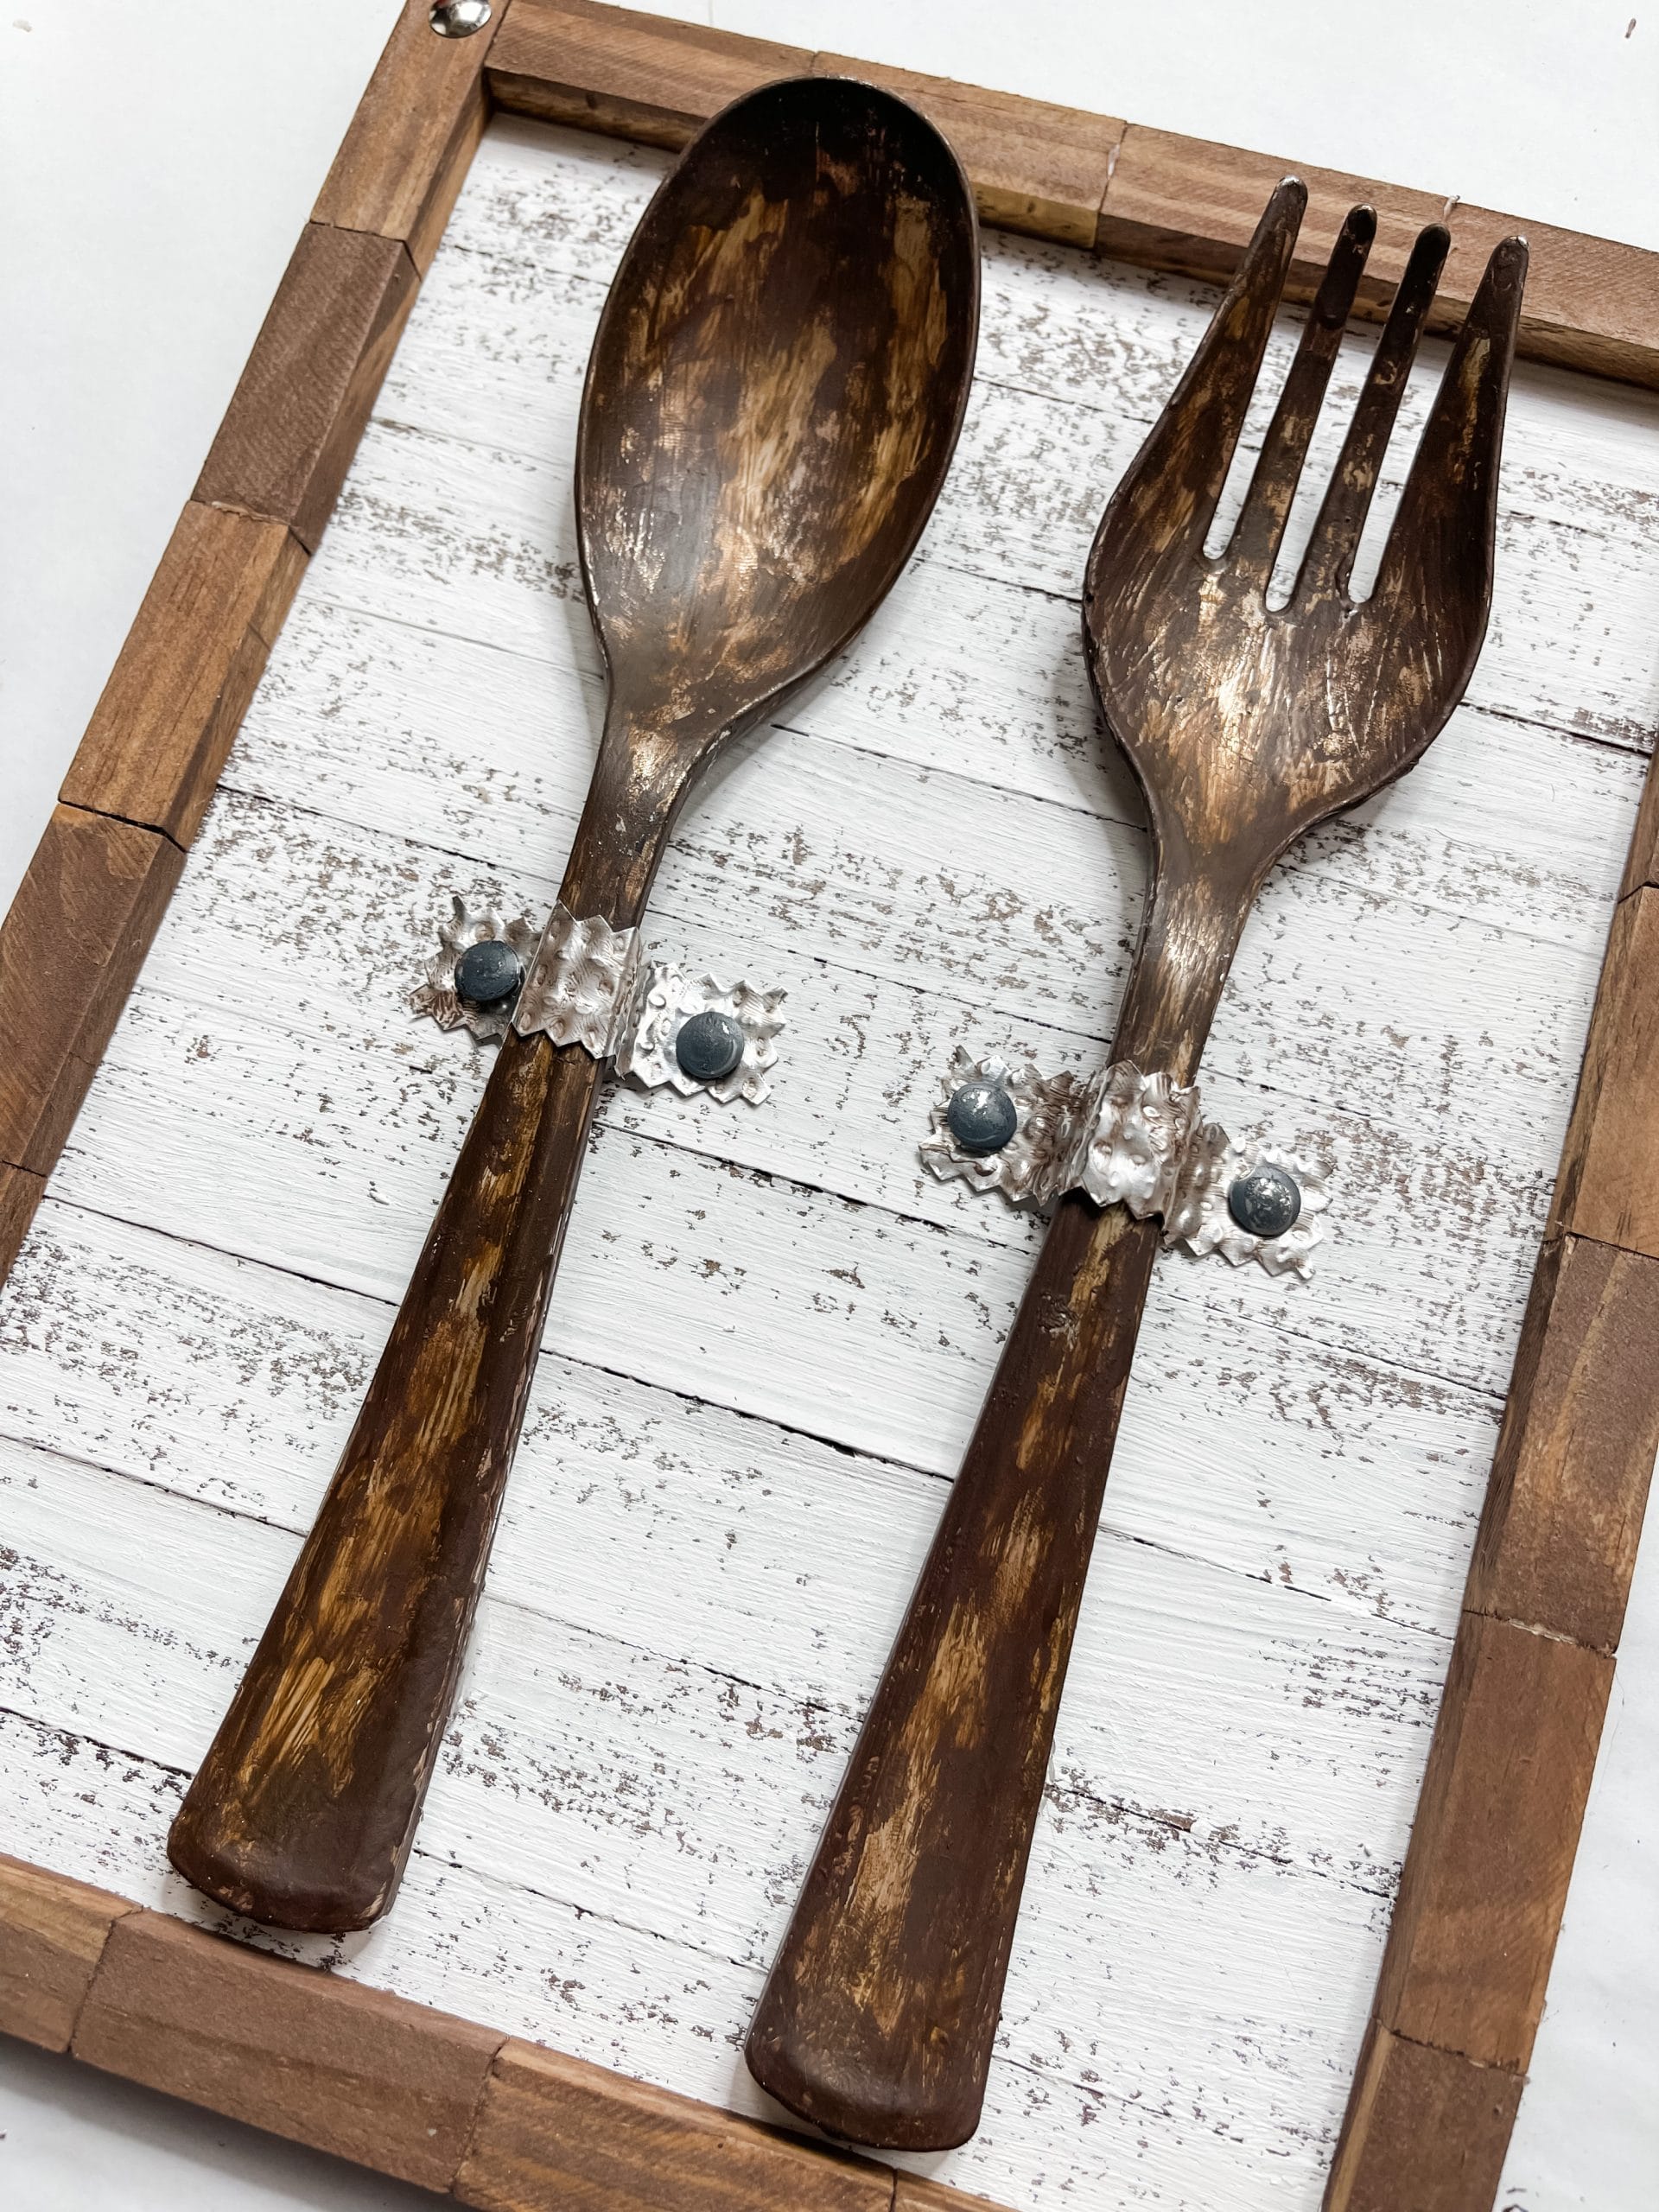 DIY Faux Rust Fork and Spoon Wall Decor